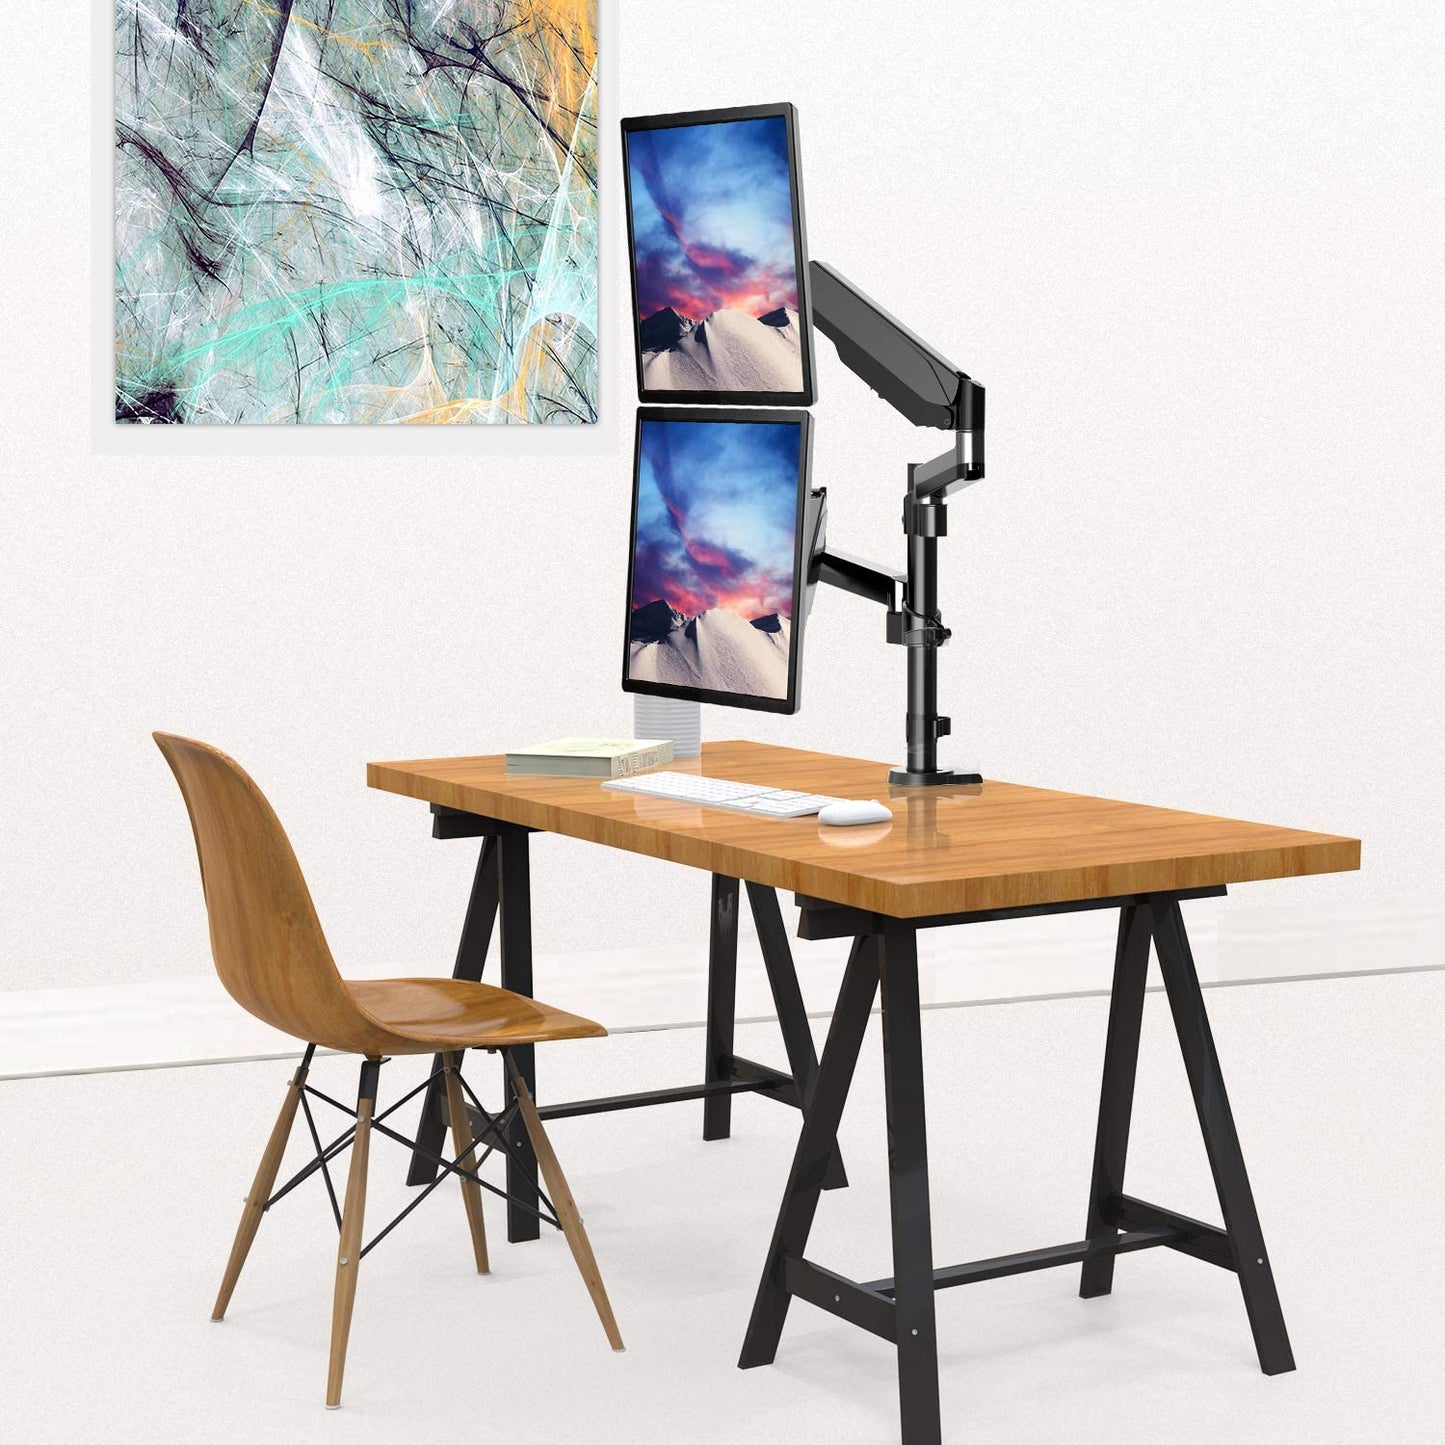 Dual Arms monitor arm places your monitors in portrait or lanscape orientation